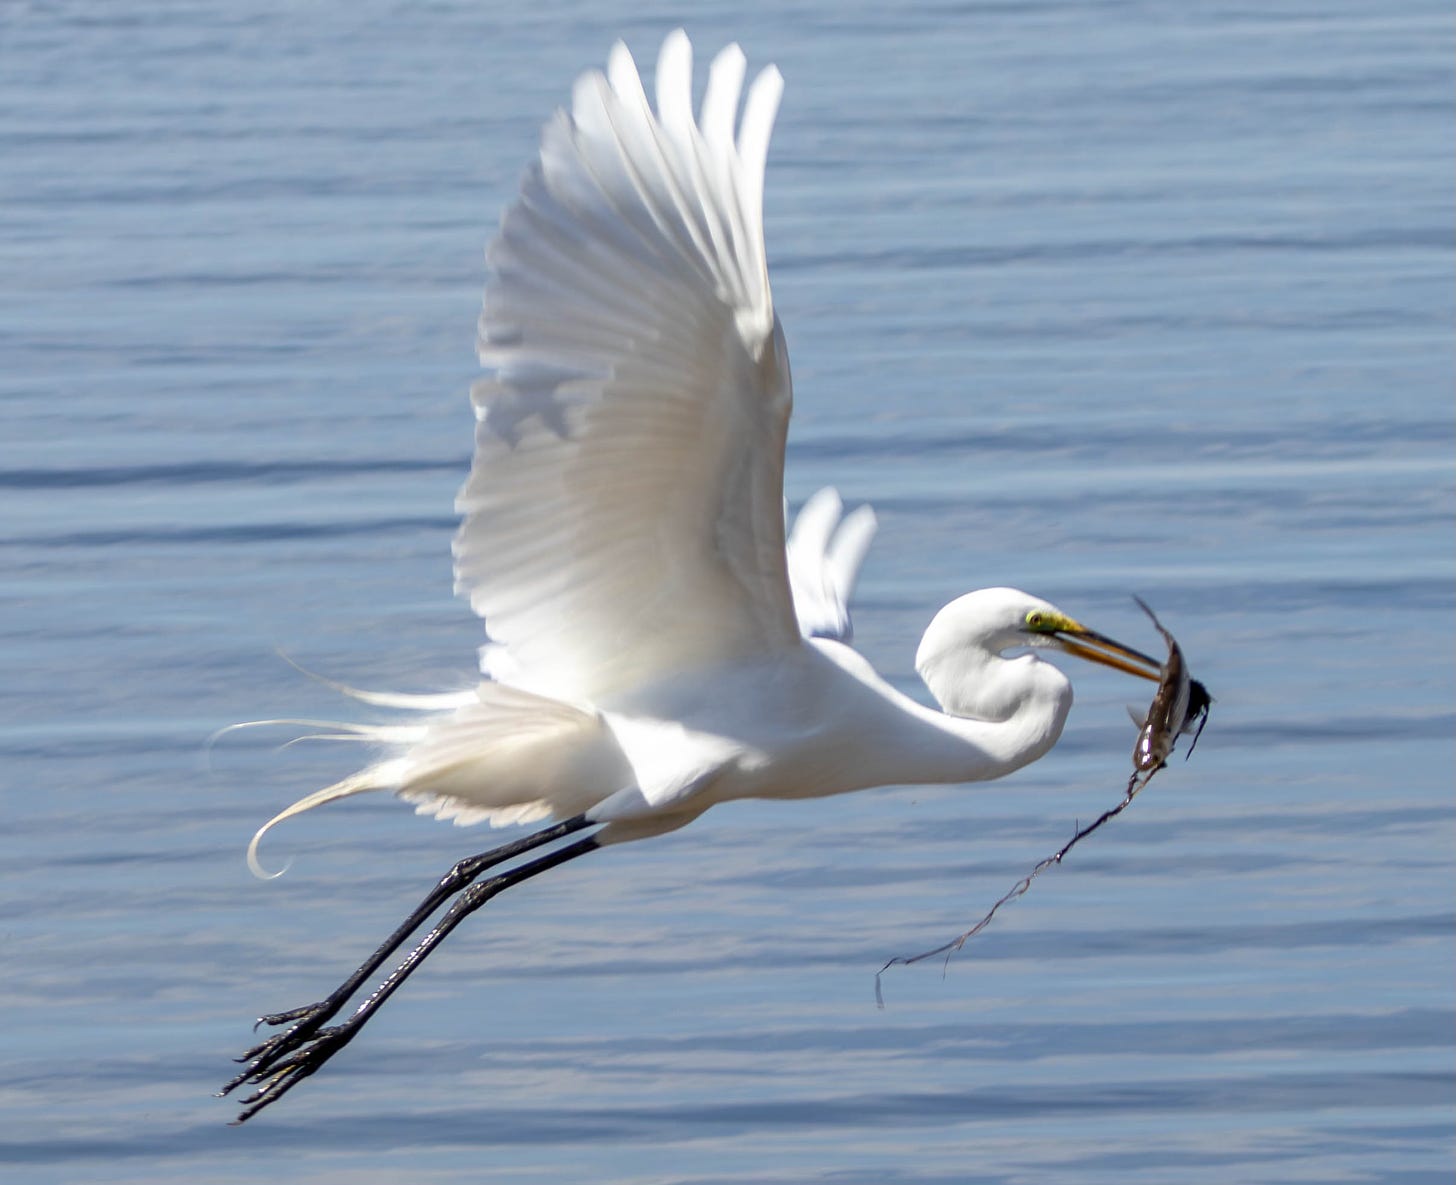 A beautiful white great egret flies above the blue water of the sound with a fish in his mouth